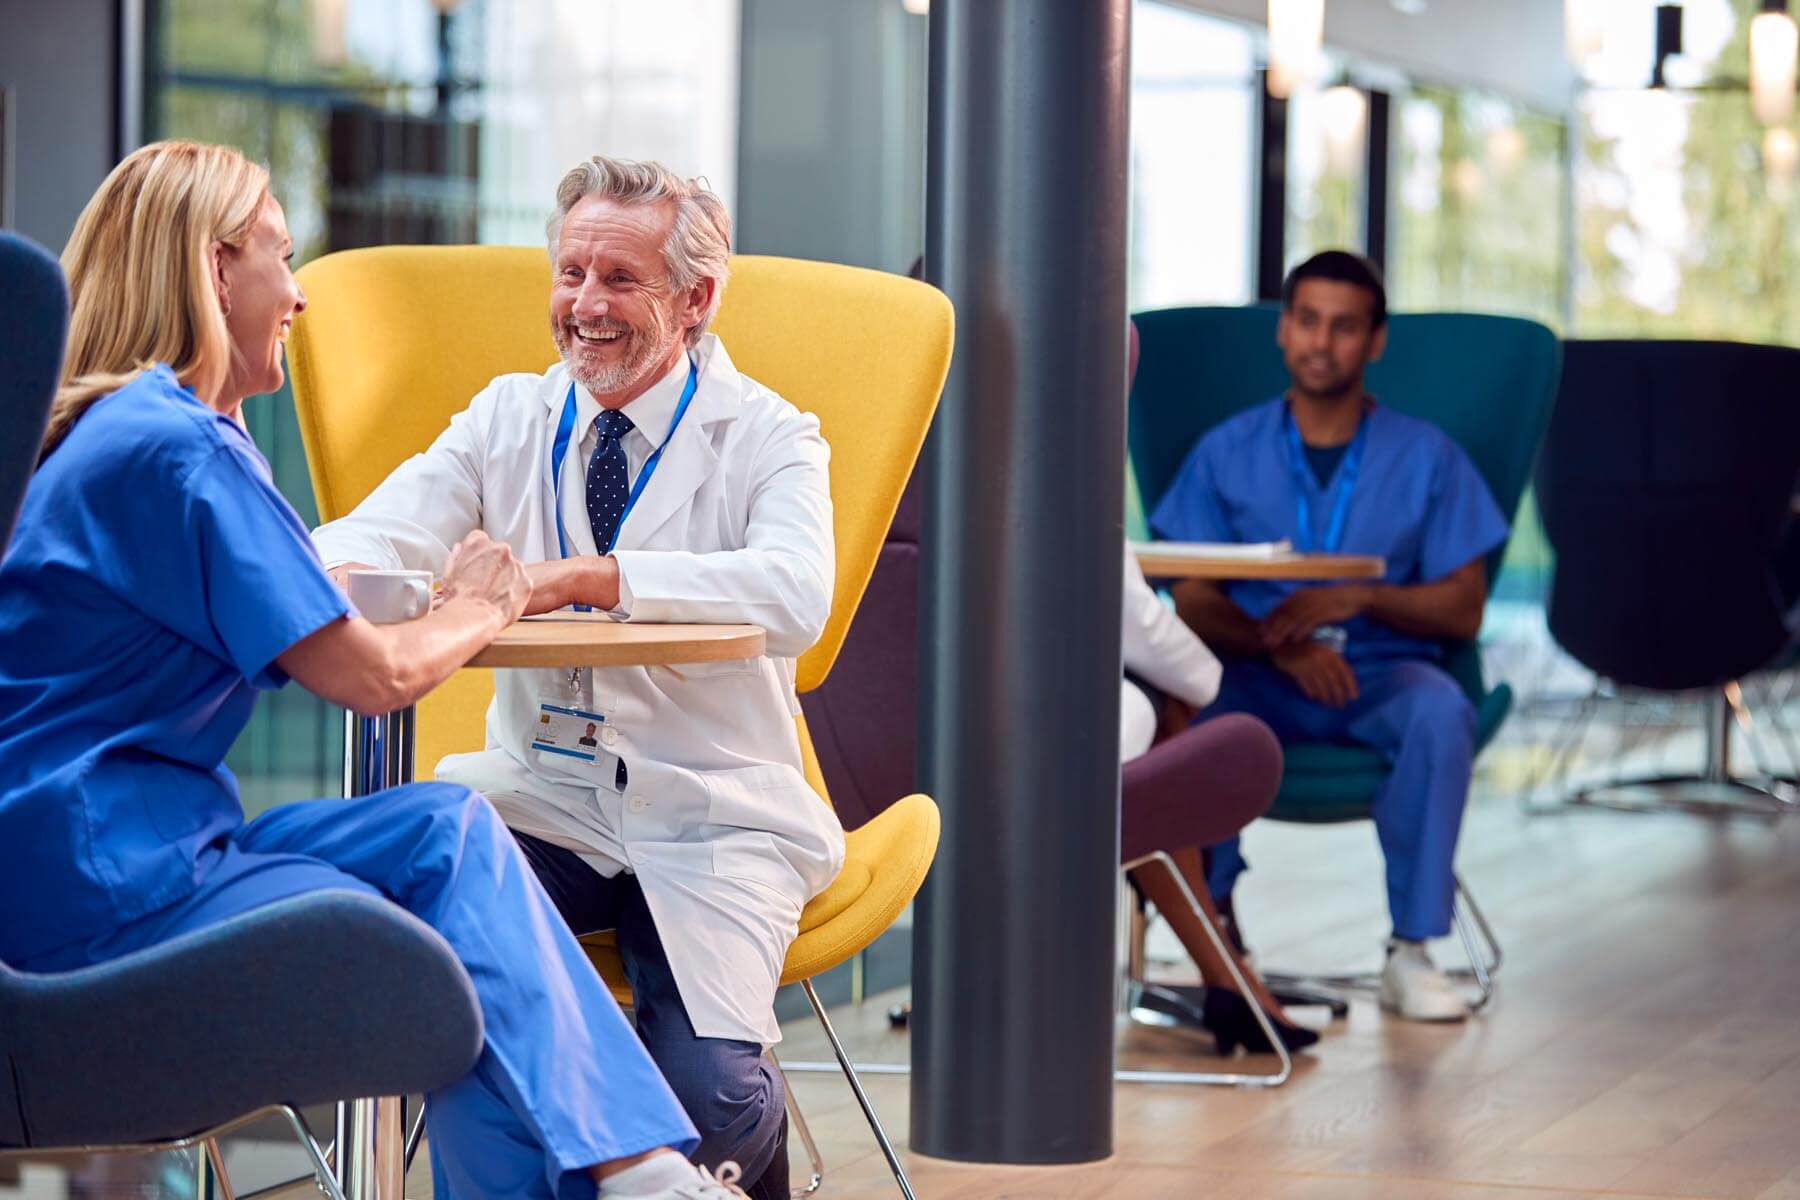 Two clinicians sitting down on chairs facing each other and smiling